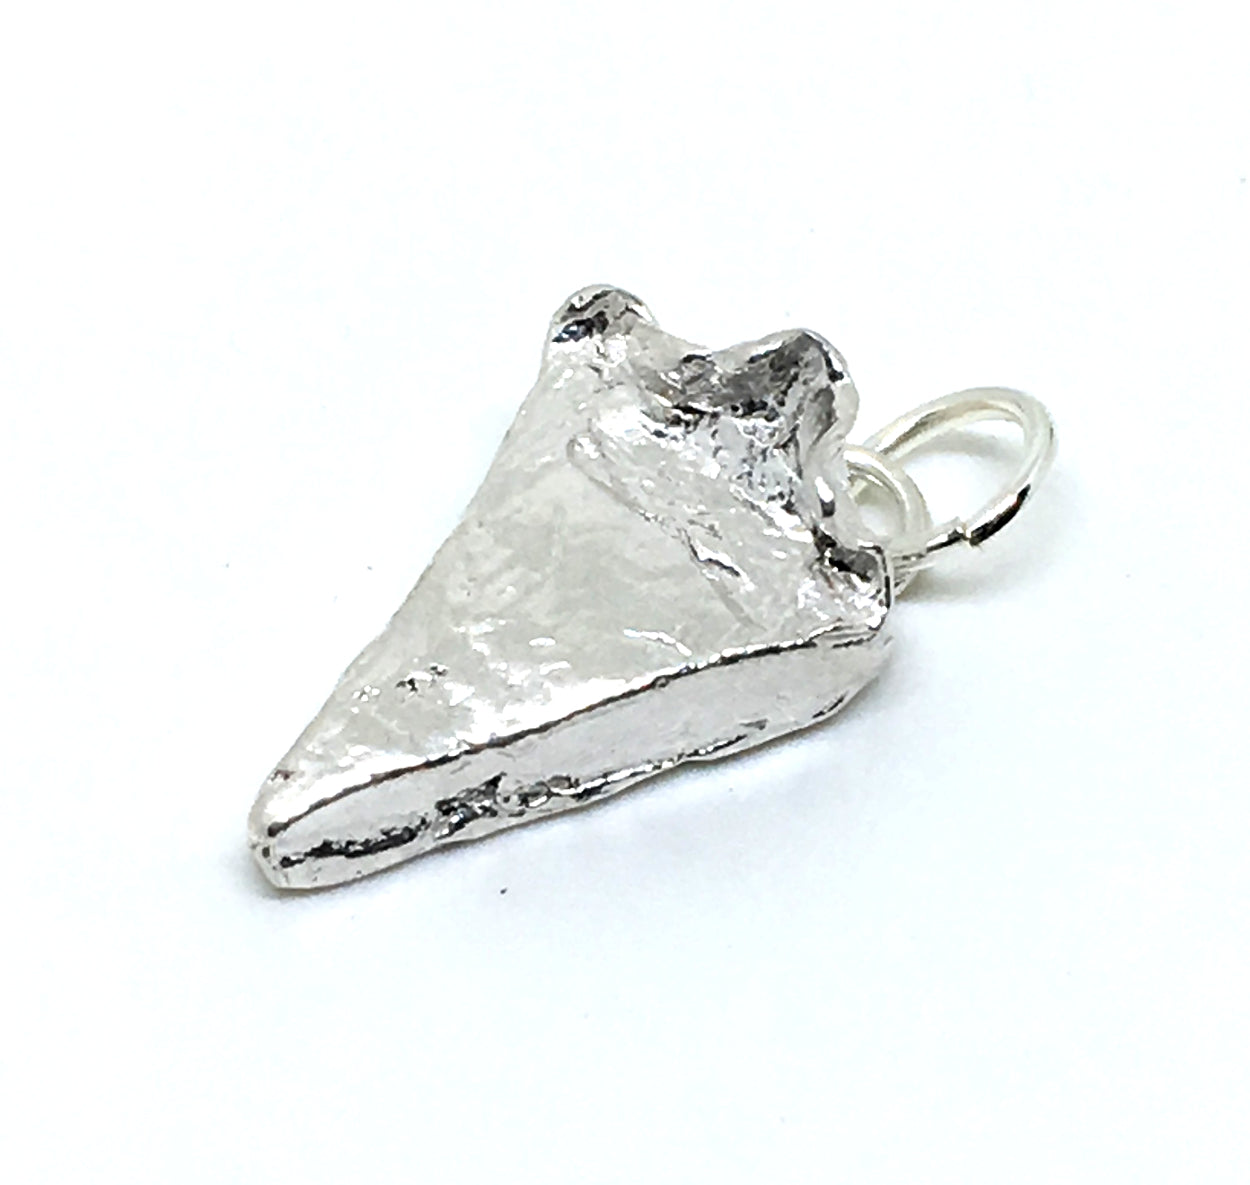 Slice of Pie Pendant Necklace in Sterling Silver